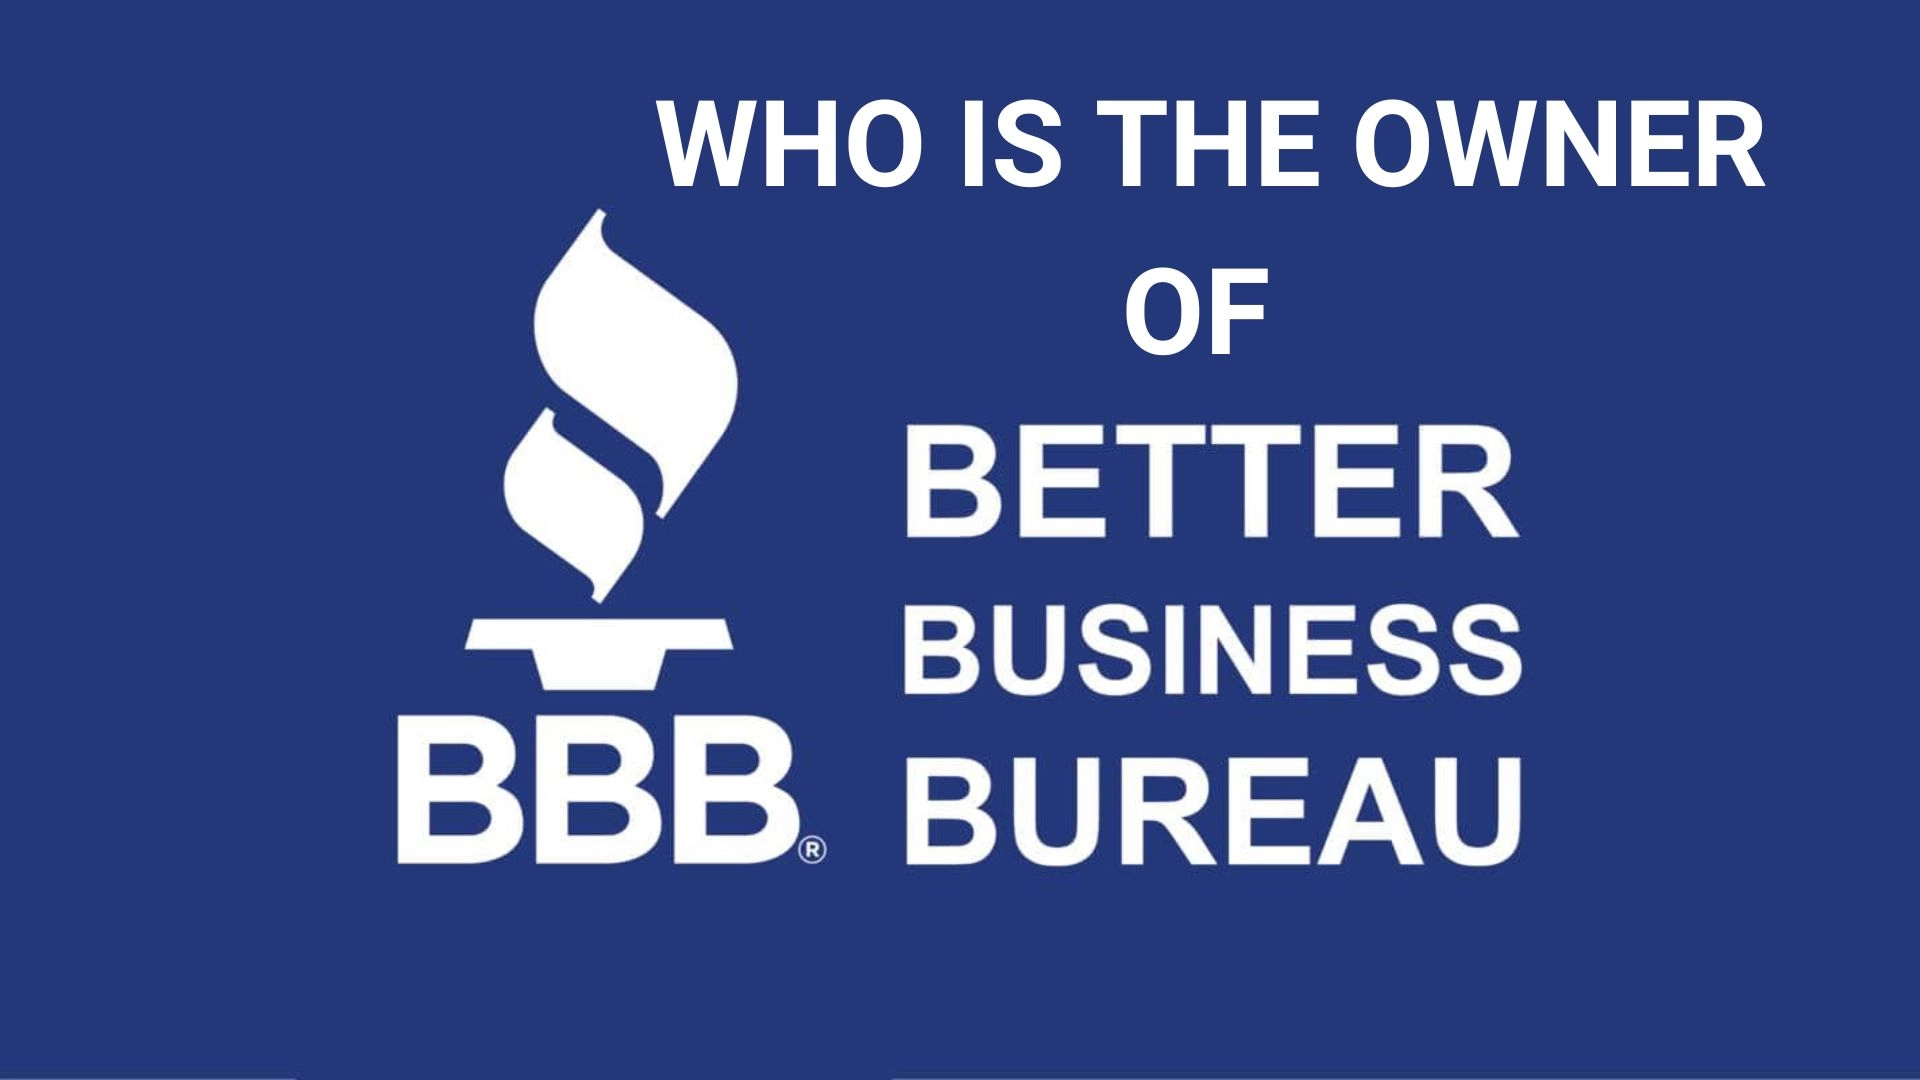 Who is the owner of Better Business Bureau